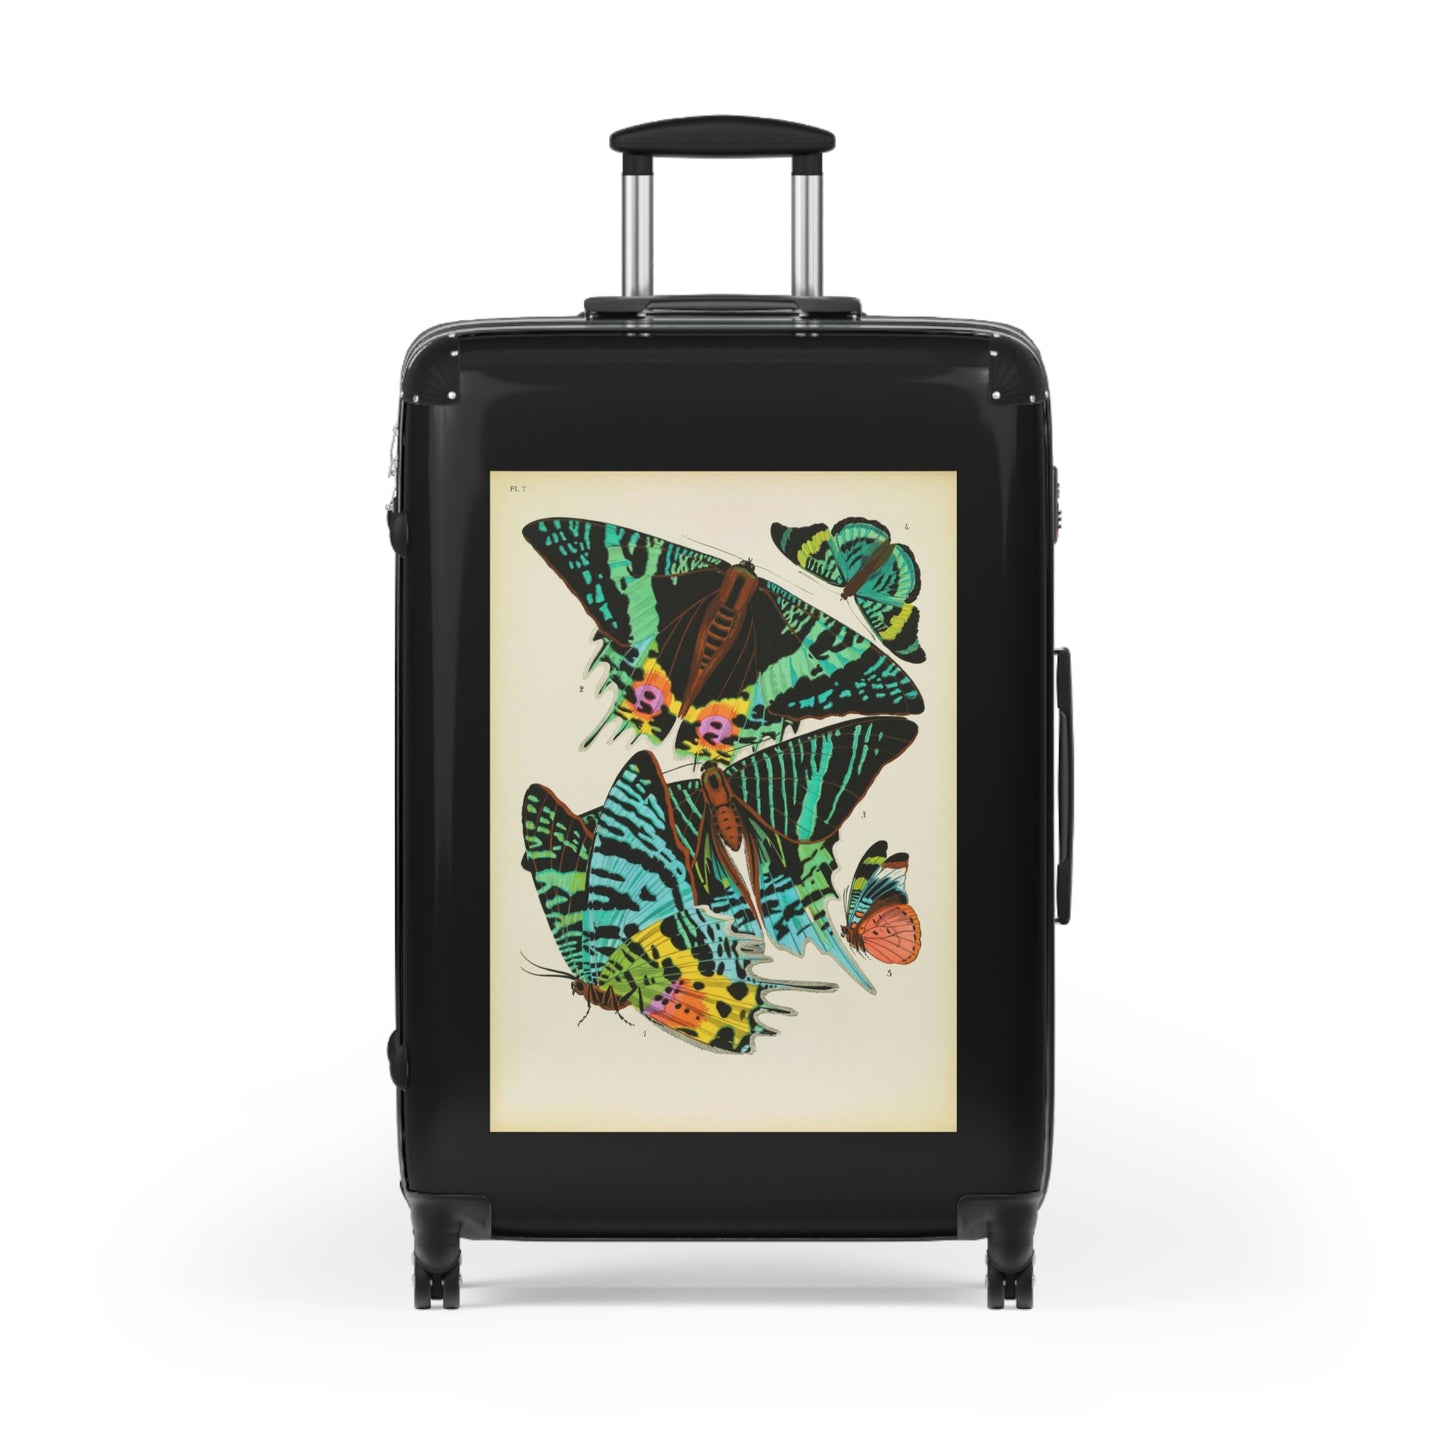 Getrott Butterflies Macrolepidopteran Rhopalocera Lepidoptera Black Red Yellow Cabin Suitcase Rolling Luggage Inner Pockets Extended Storage Adjustable Telescopic Handle Inner Pockets Double wheeled Polycarbonate Hard-shell Built-in Lock